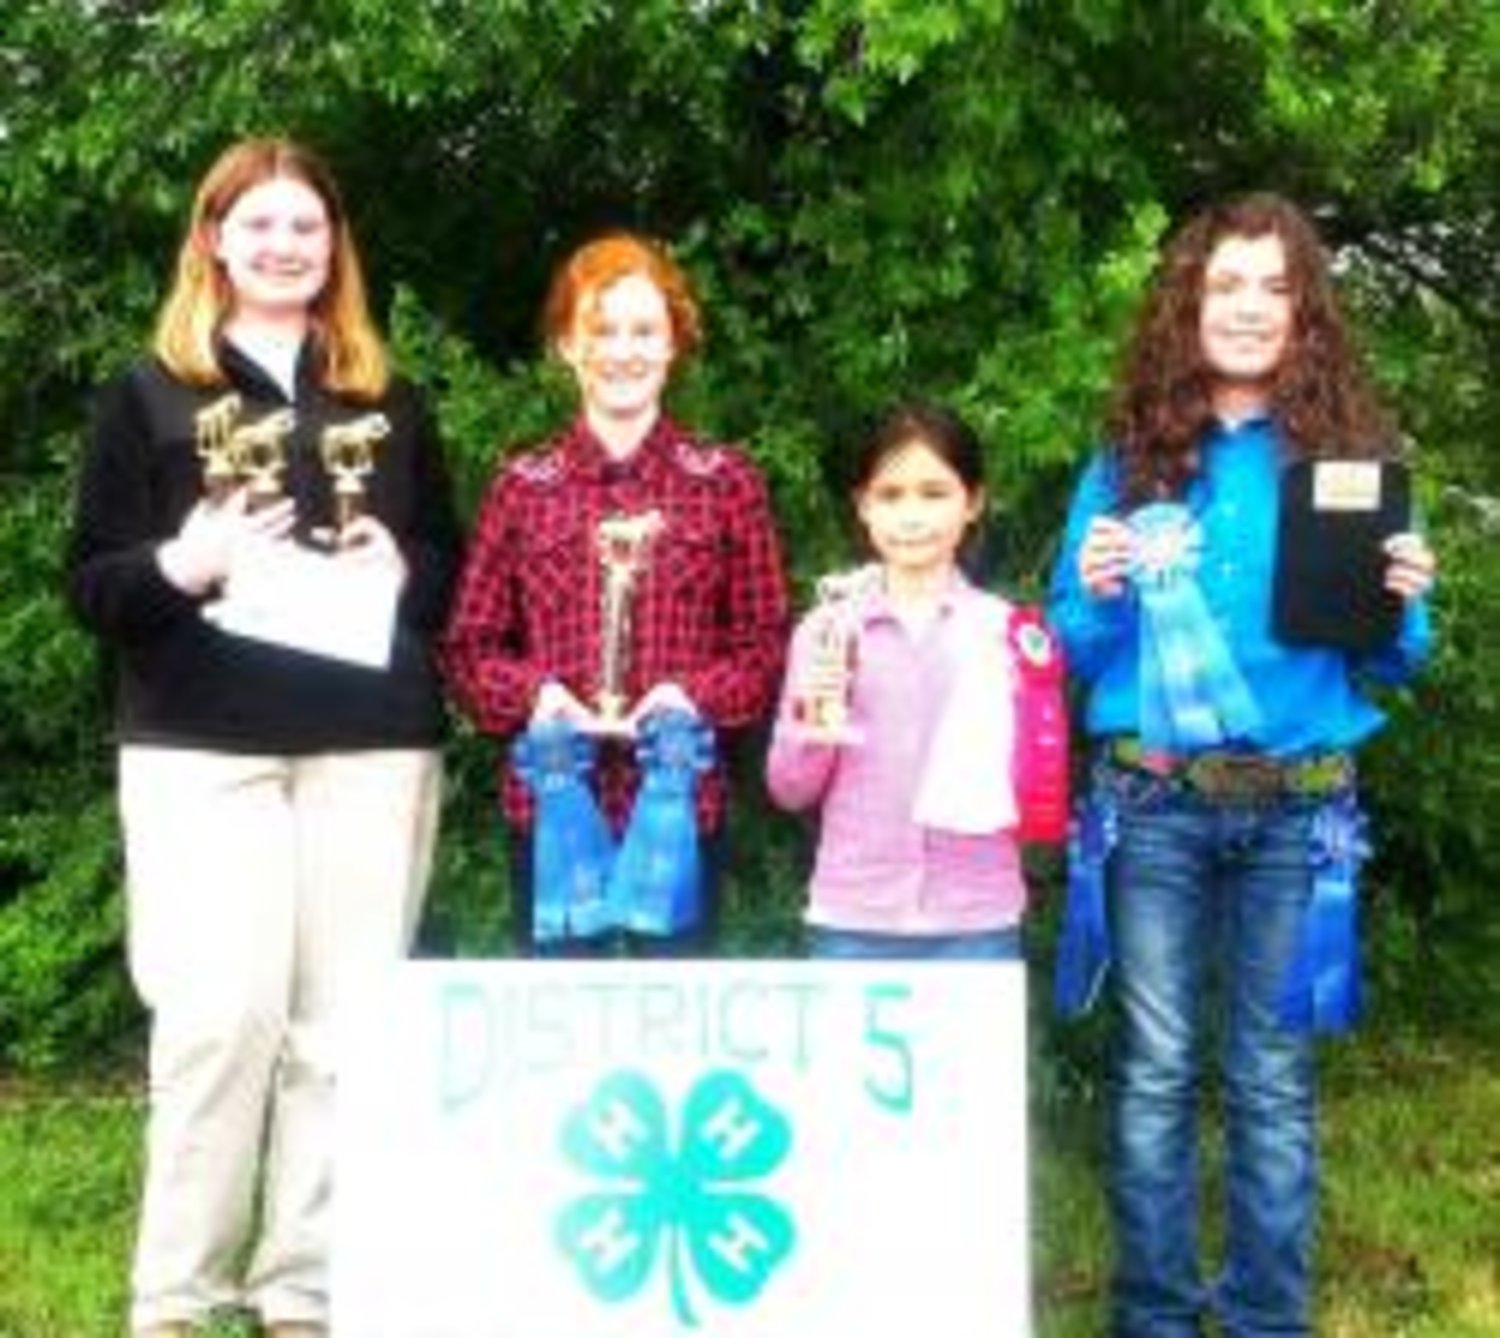 Pictured (L-R): are the following members of the Wood County 4-H Horse Club and their awards: Anna Carter -- 3rd Place, senior; Ahneka Tullos -- 1st Place, junior; Helena Bautista -- 3rd Place, junior; Kaylin Baker -- 1st Place, intermediate. Photo courtesy of the Wood County Extension Office.